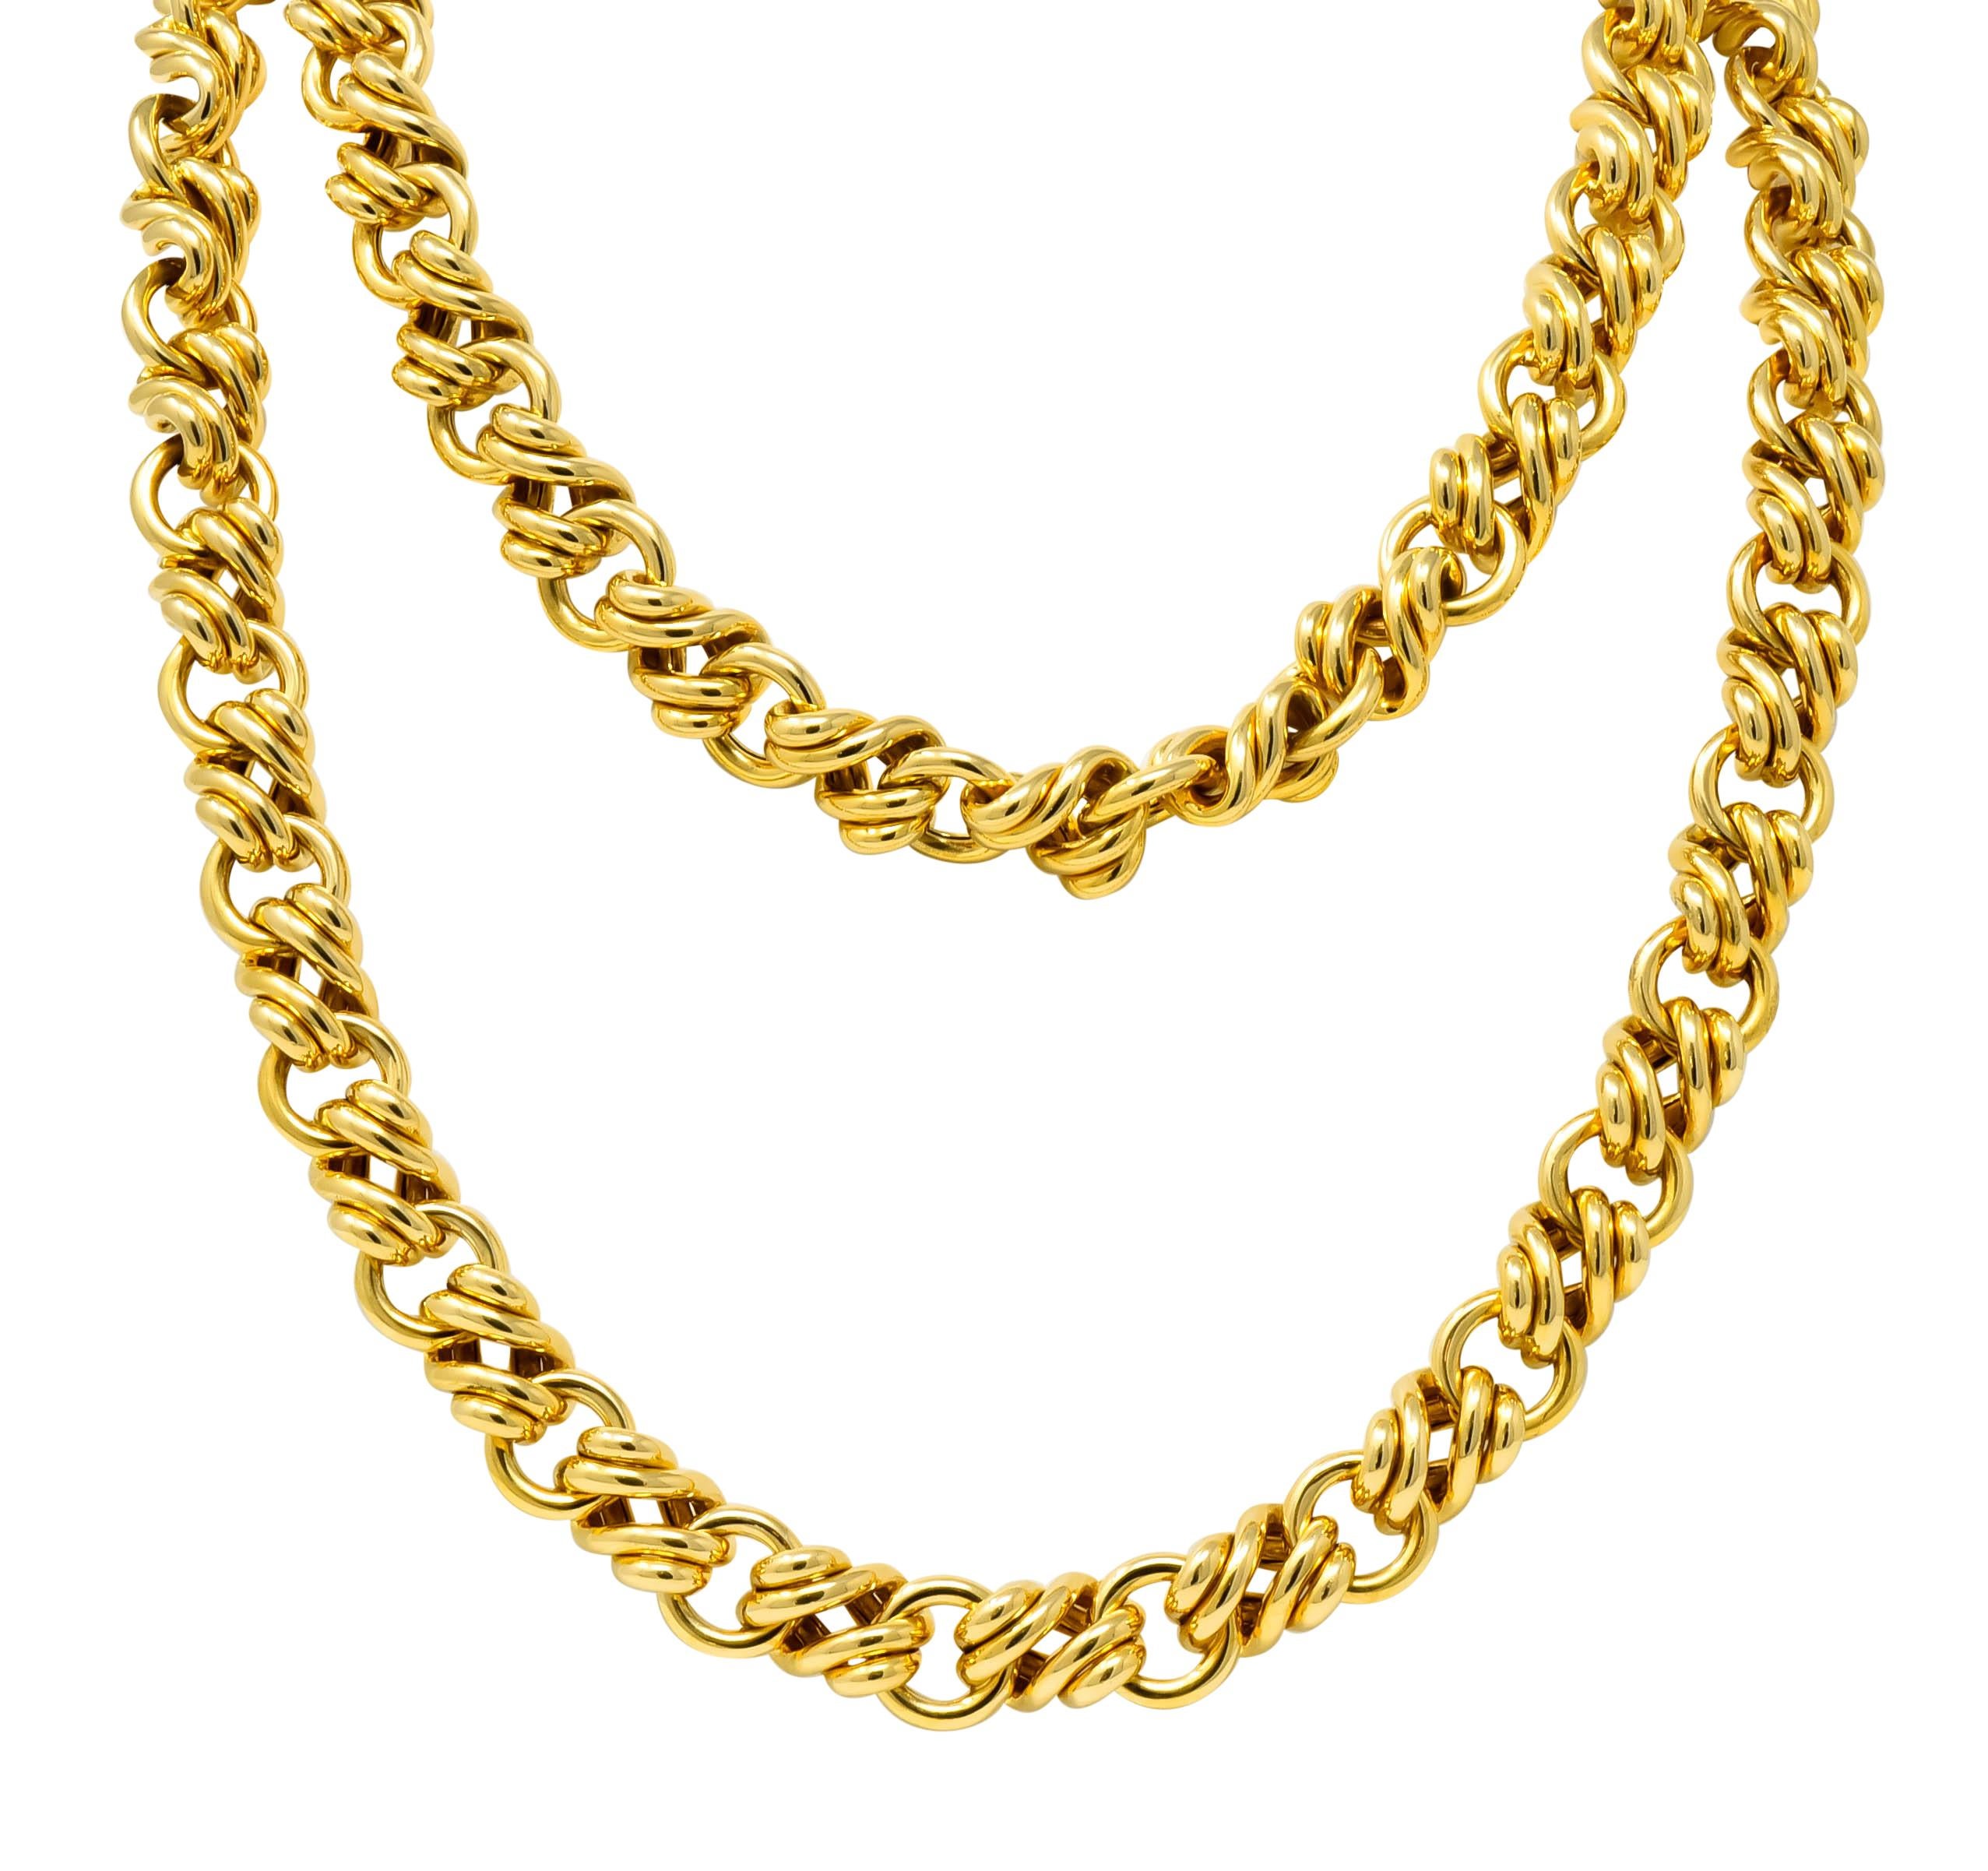 Contemporary Tiffany & Co. Vintage 18 Karat Yellow Gold Substantially Linked Chain Necklace